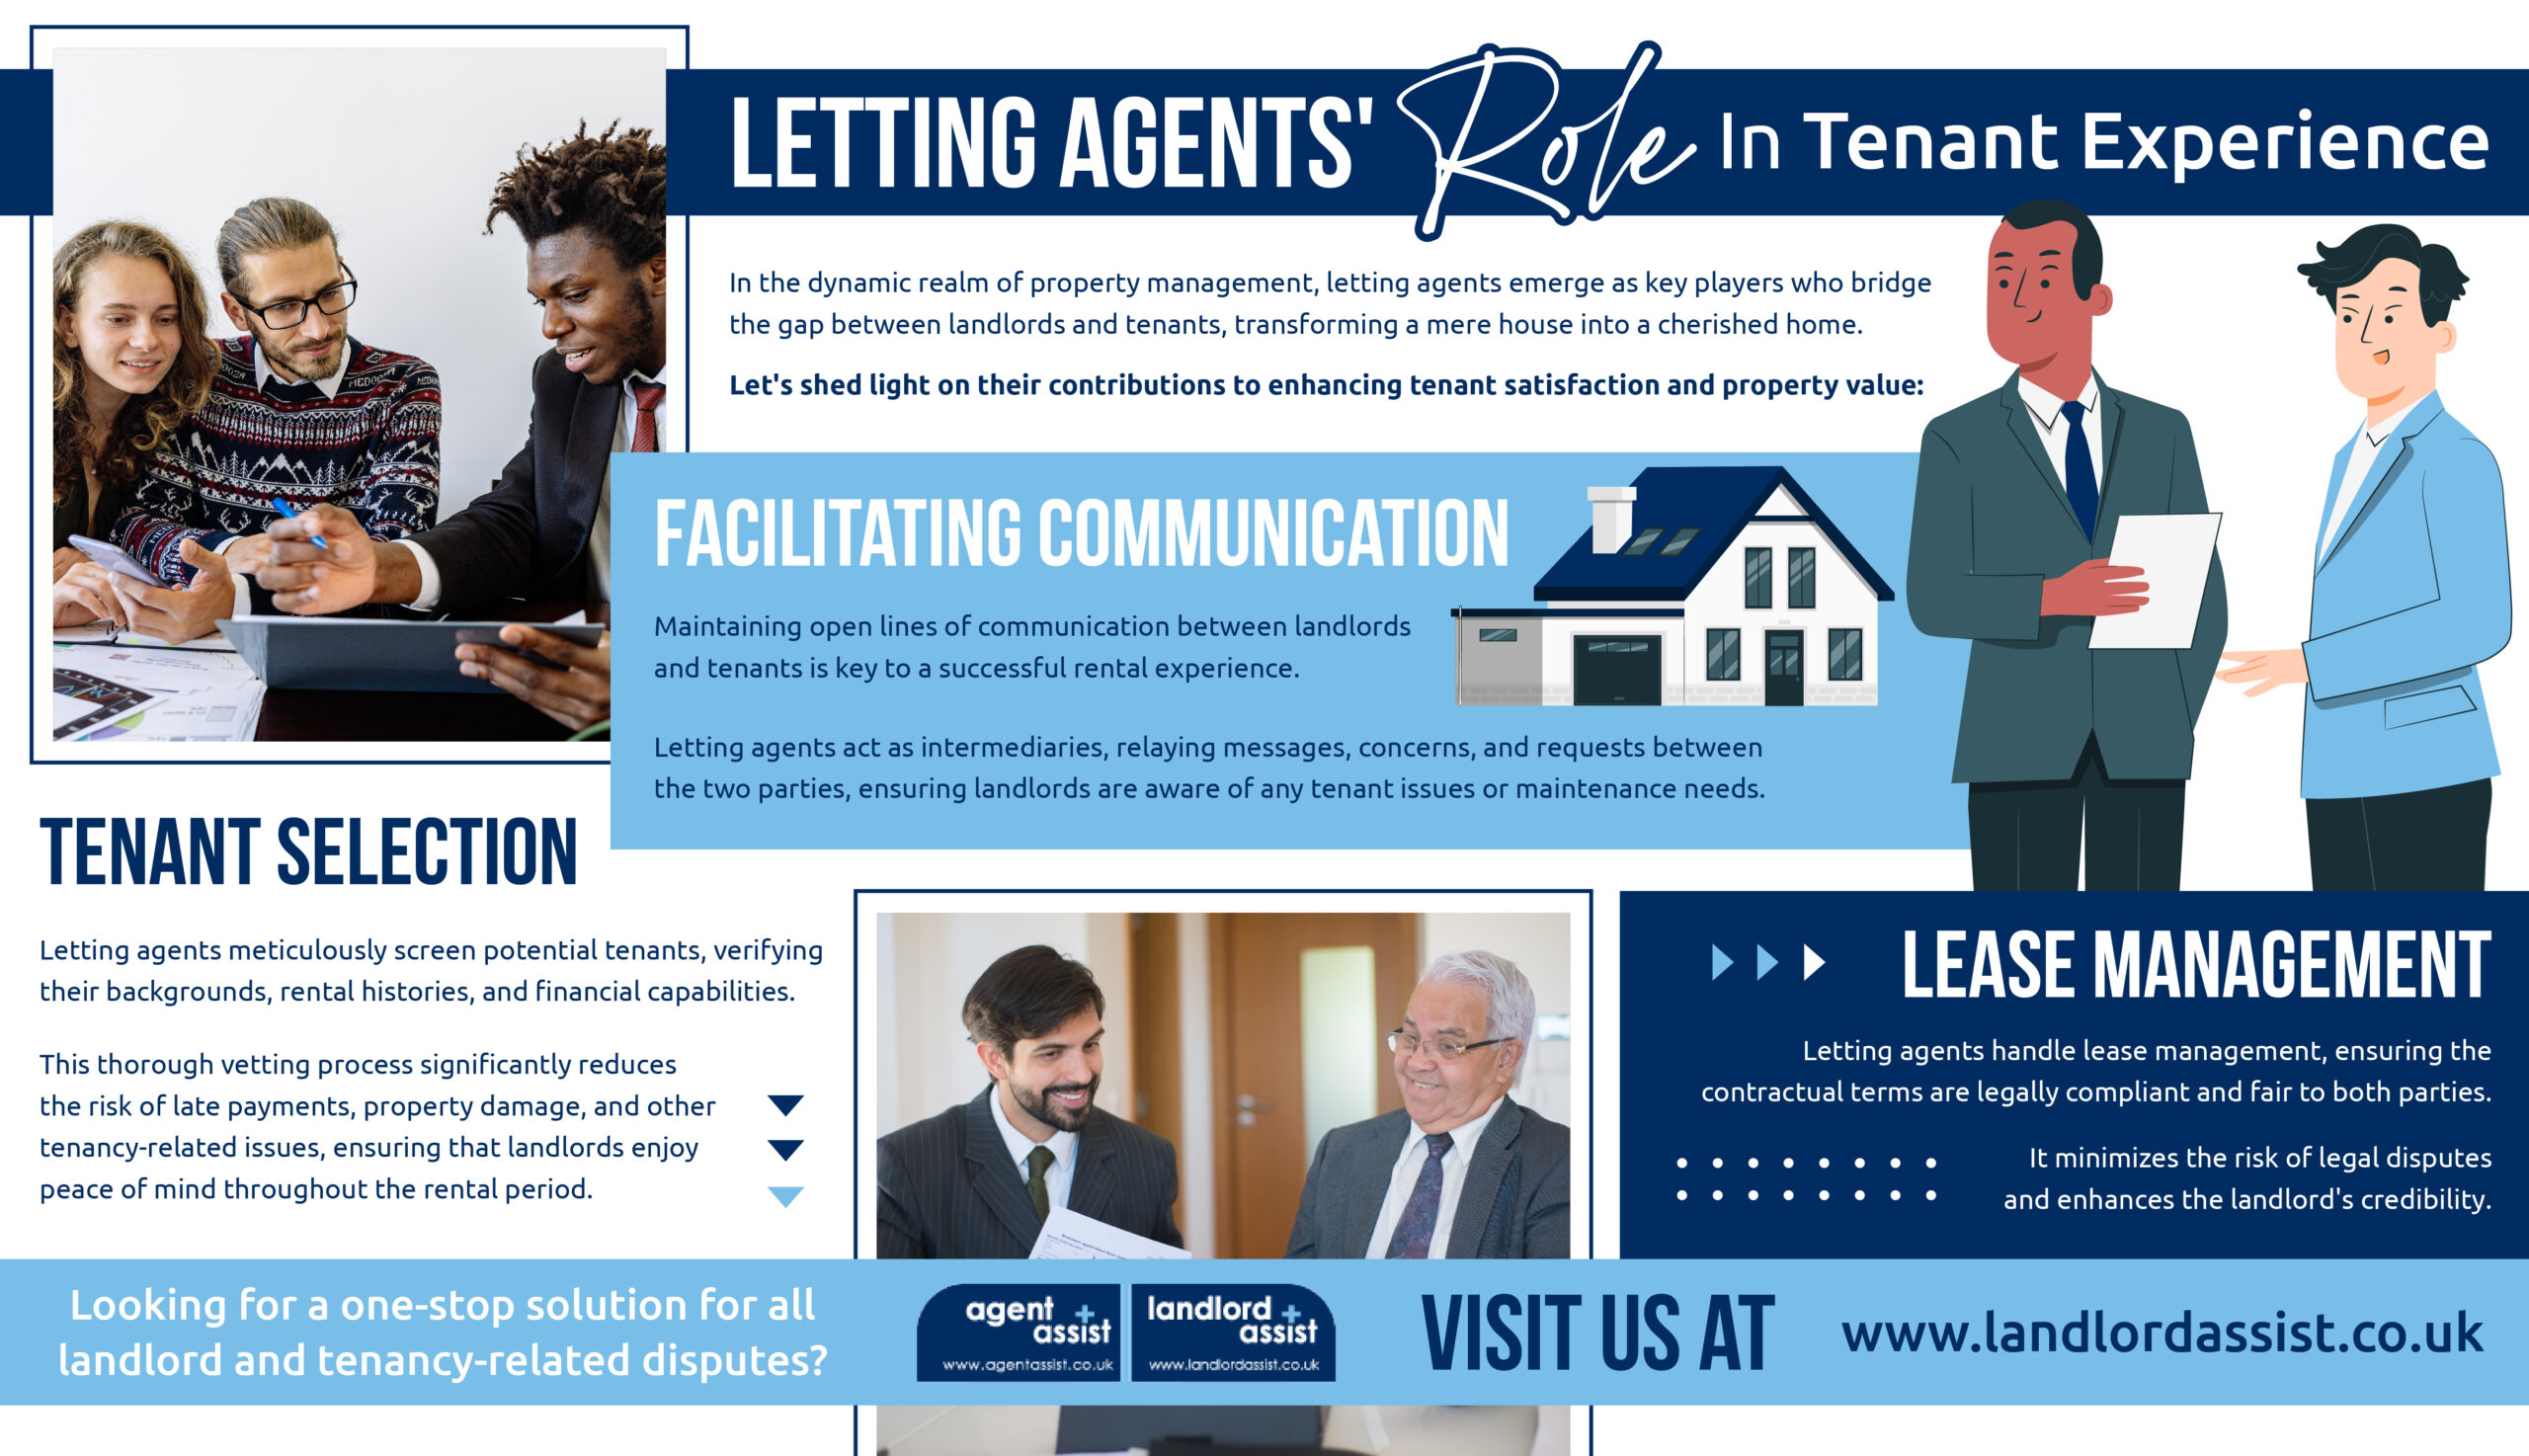 Letting Agents' Role in Tenant Experience